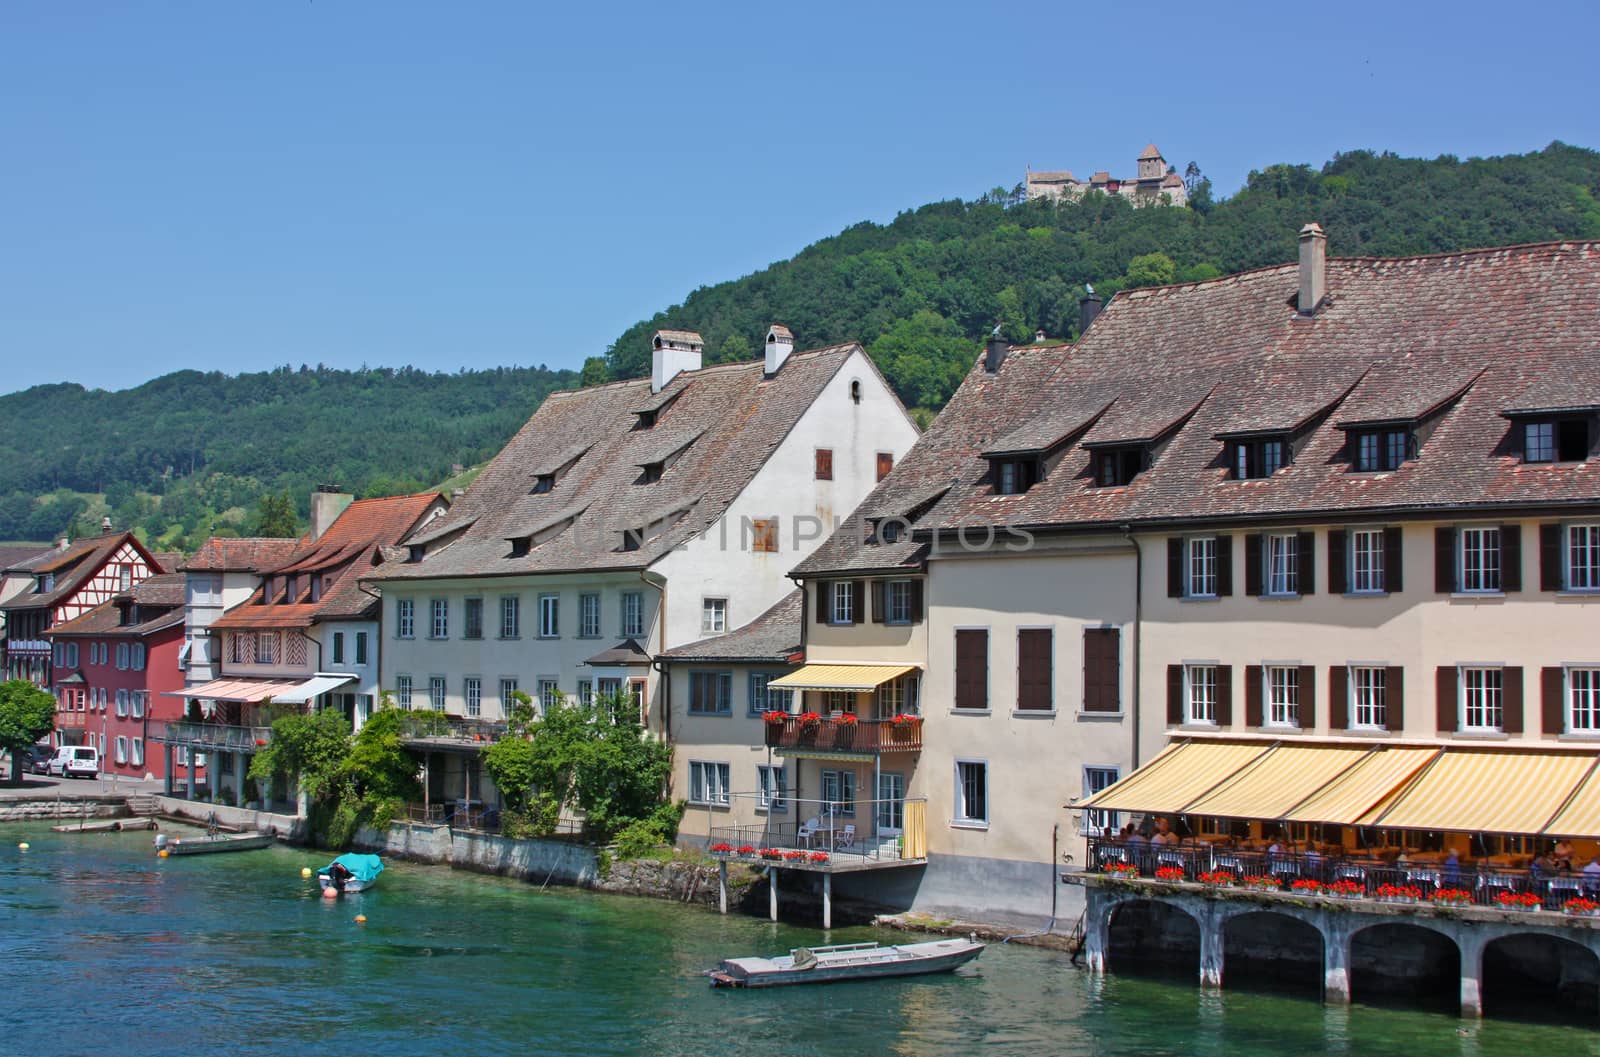 With many medieval halftimbered buildings and 16thcentury houses whose façades are painted with frescoes, Stein am Rhein is one of the most beautiful sights in Switzerland.